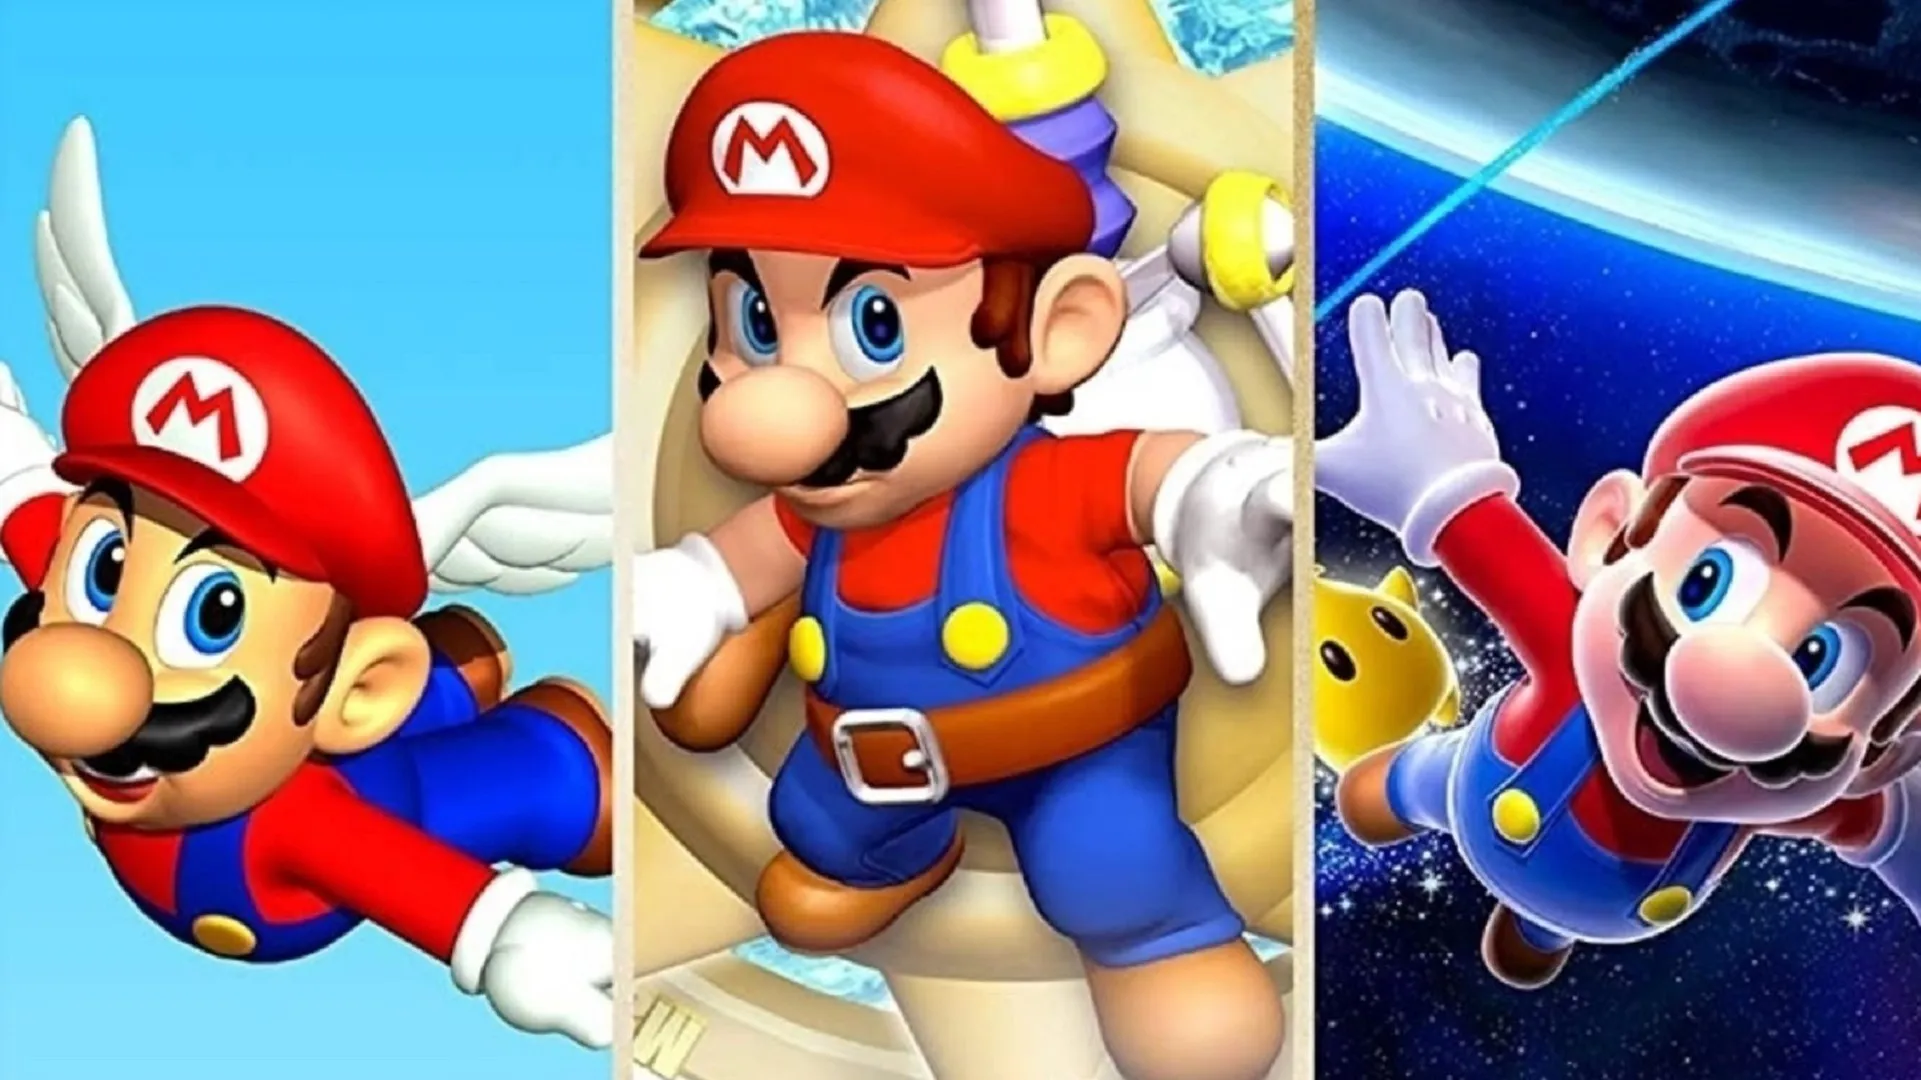  Review: Despite delivery flaws, Super Mario 3D All-Stars is a nearly perfect collection of classics 